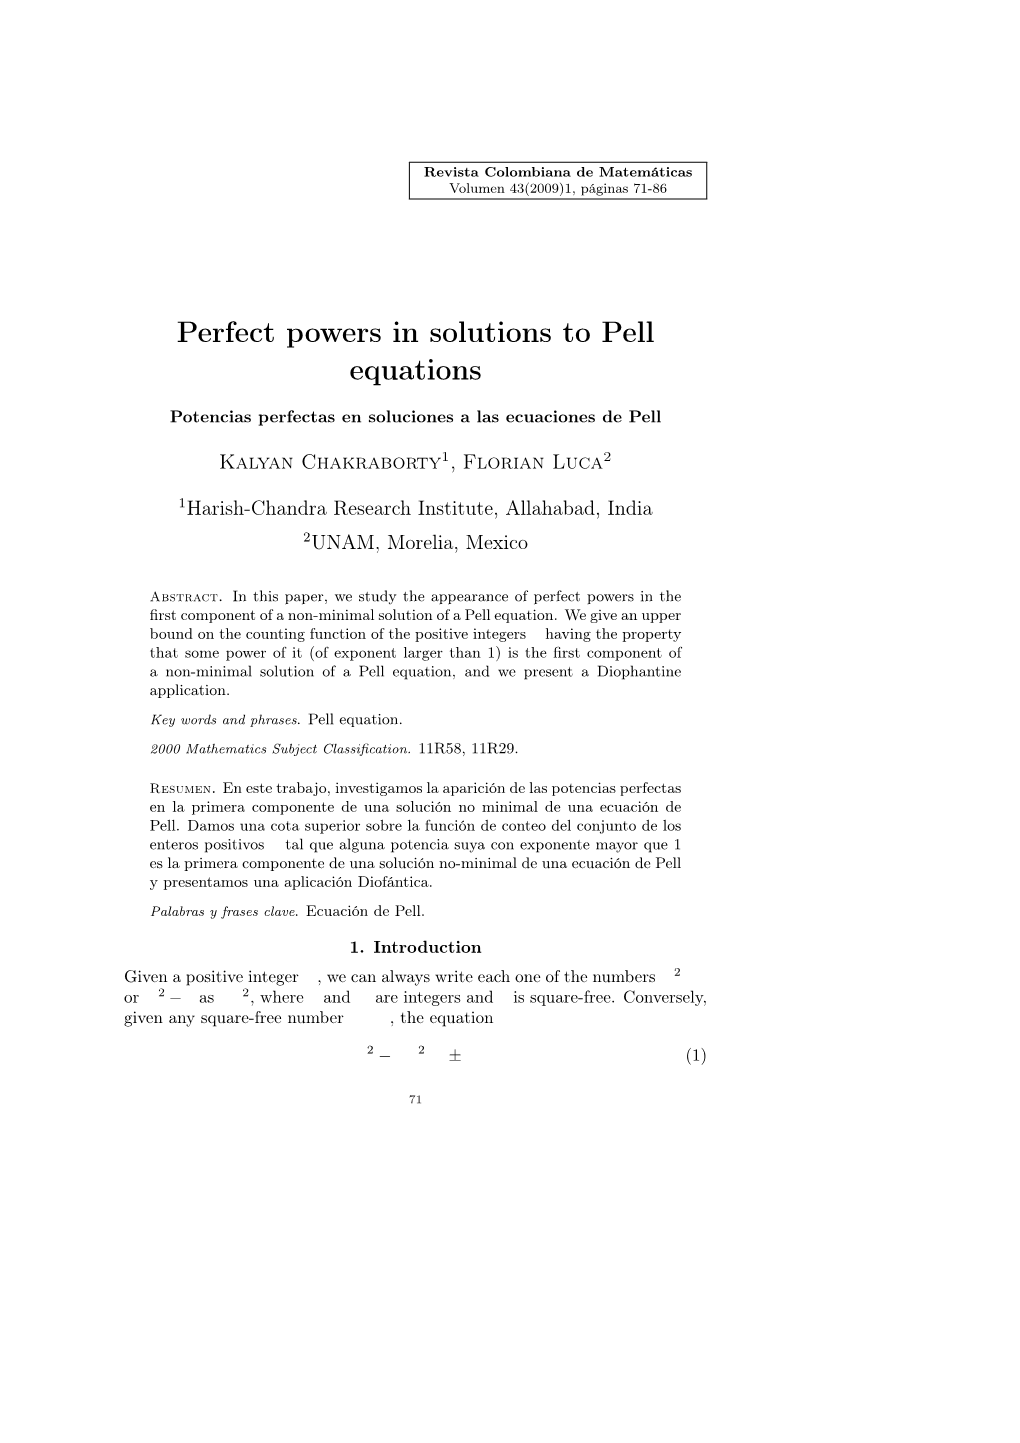 Perfect Powers in Solutions to Pell Equations